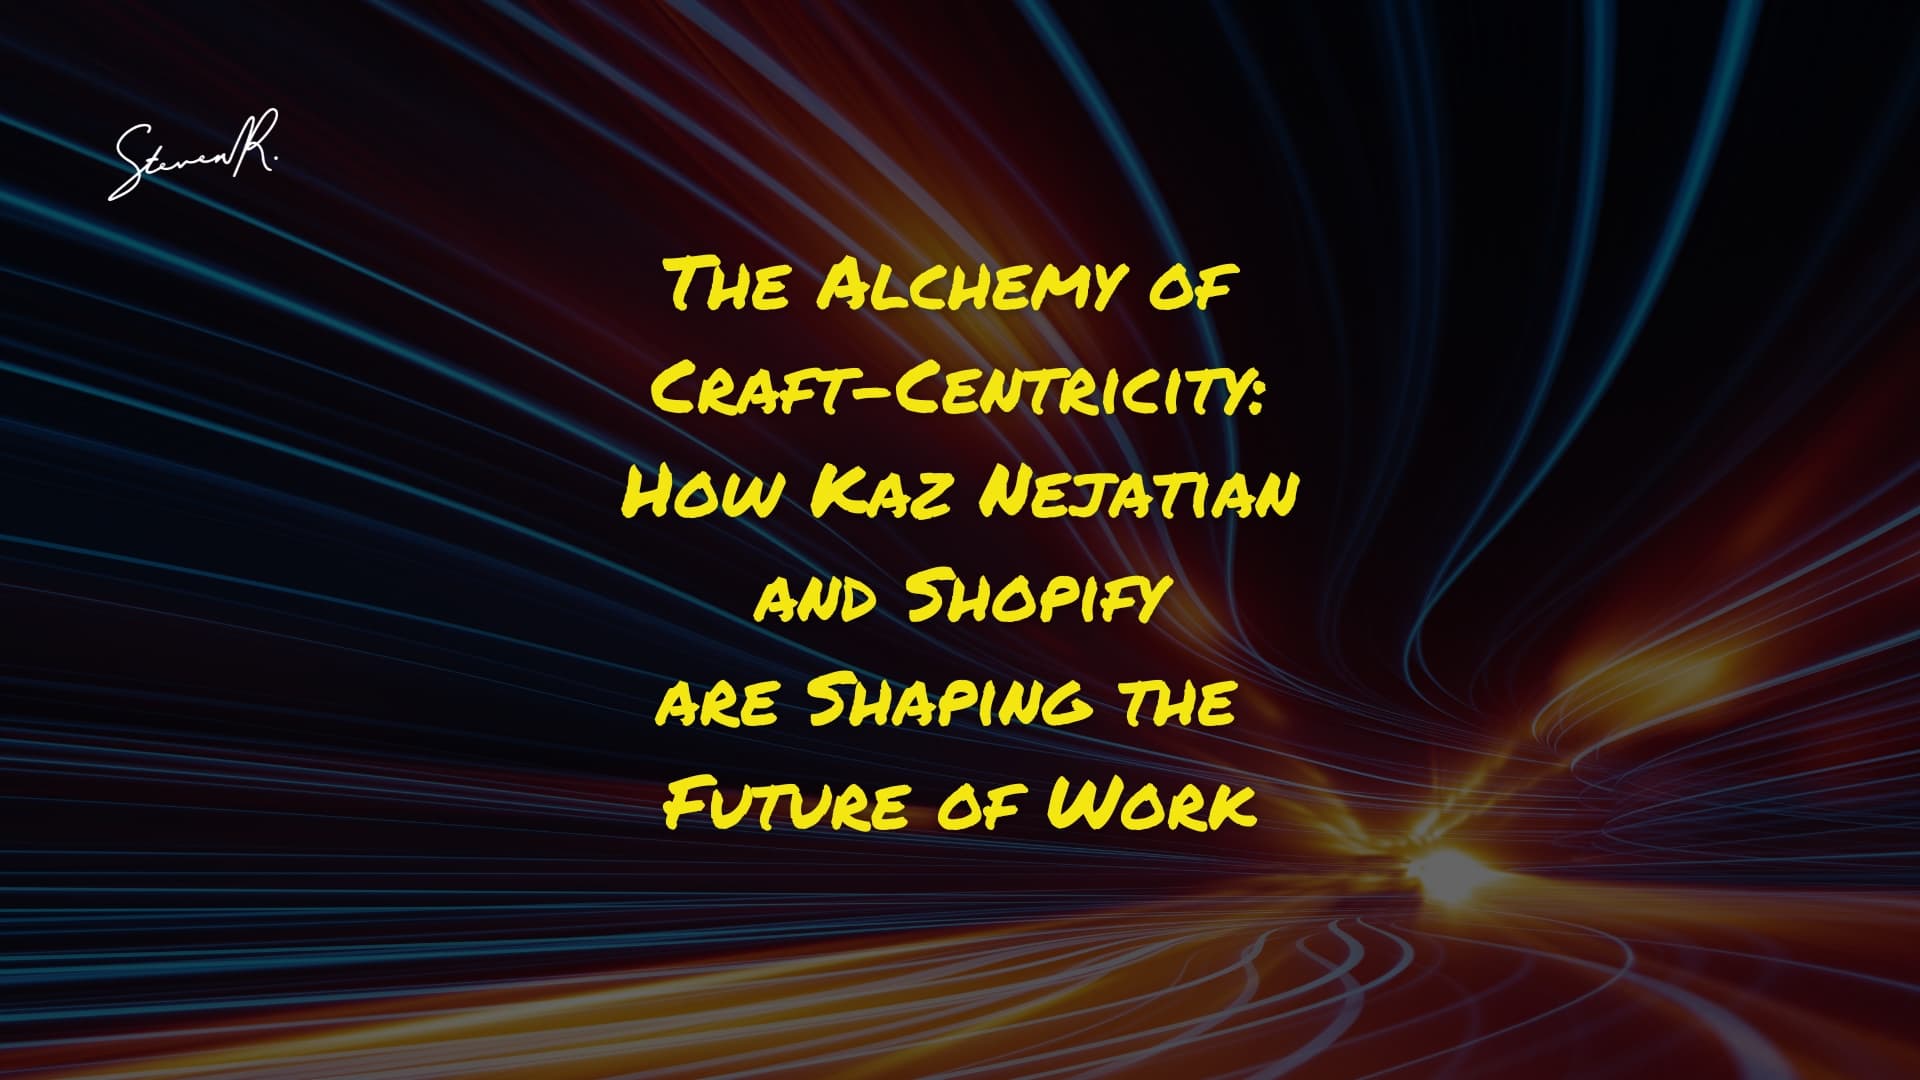 The Alchemy of Craft-Centricity: How Kaz Nejatian and Shopify are Shaping the Future of Work